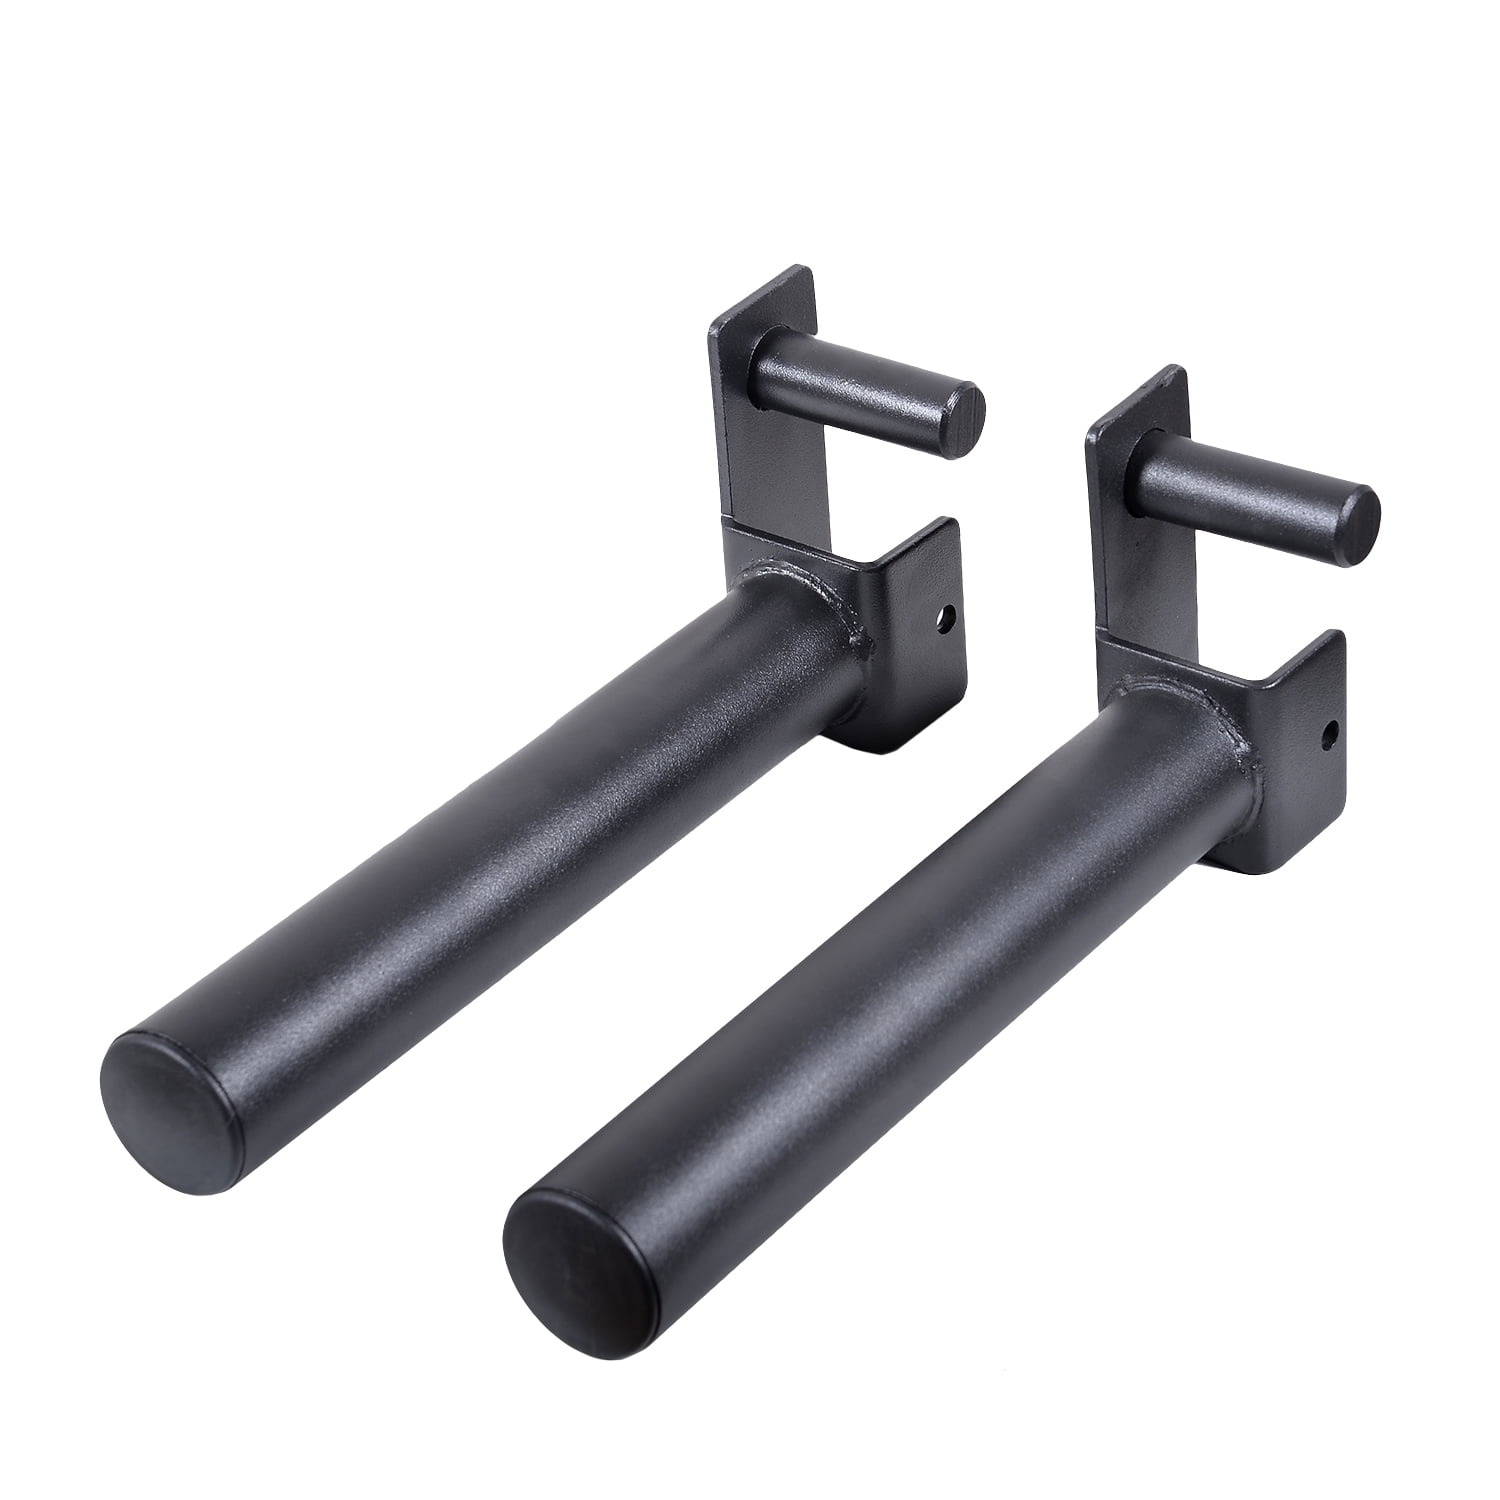 Multi Grip Set of 2 for a Squat Rack Size : for 2 x 2 Tube Power Cage Dip Bar Attachments Attachment Set for 2x2 or 3x3Steel Tubing Power Cages 